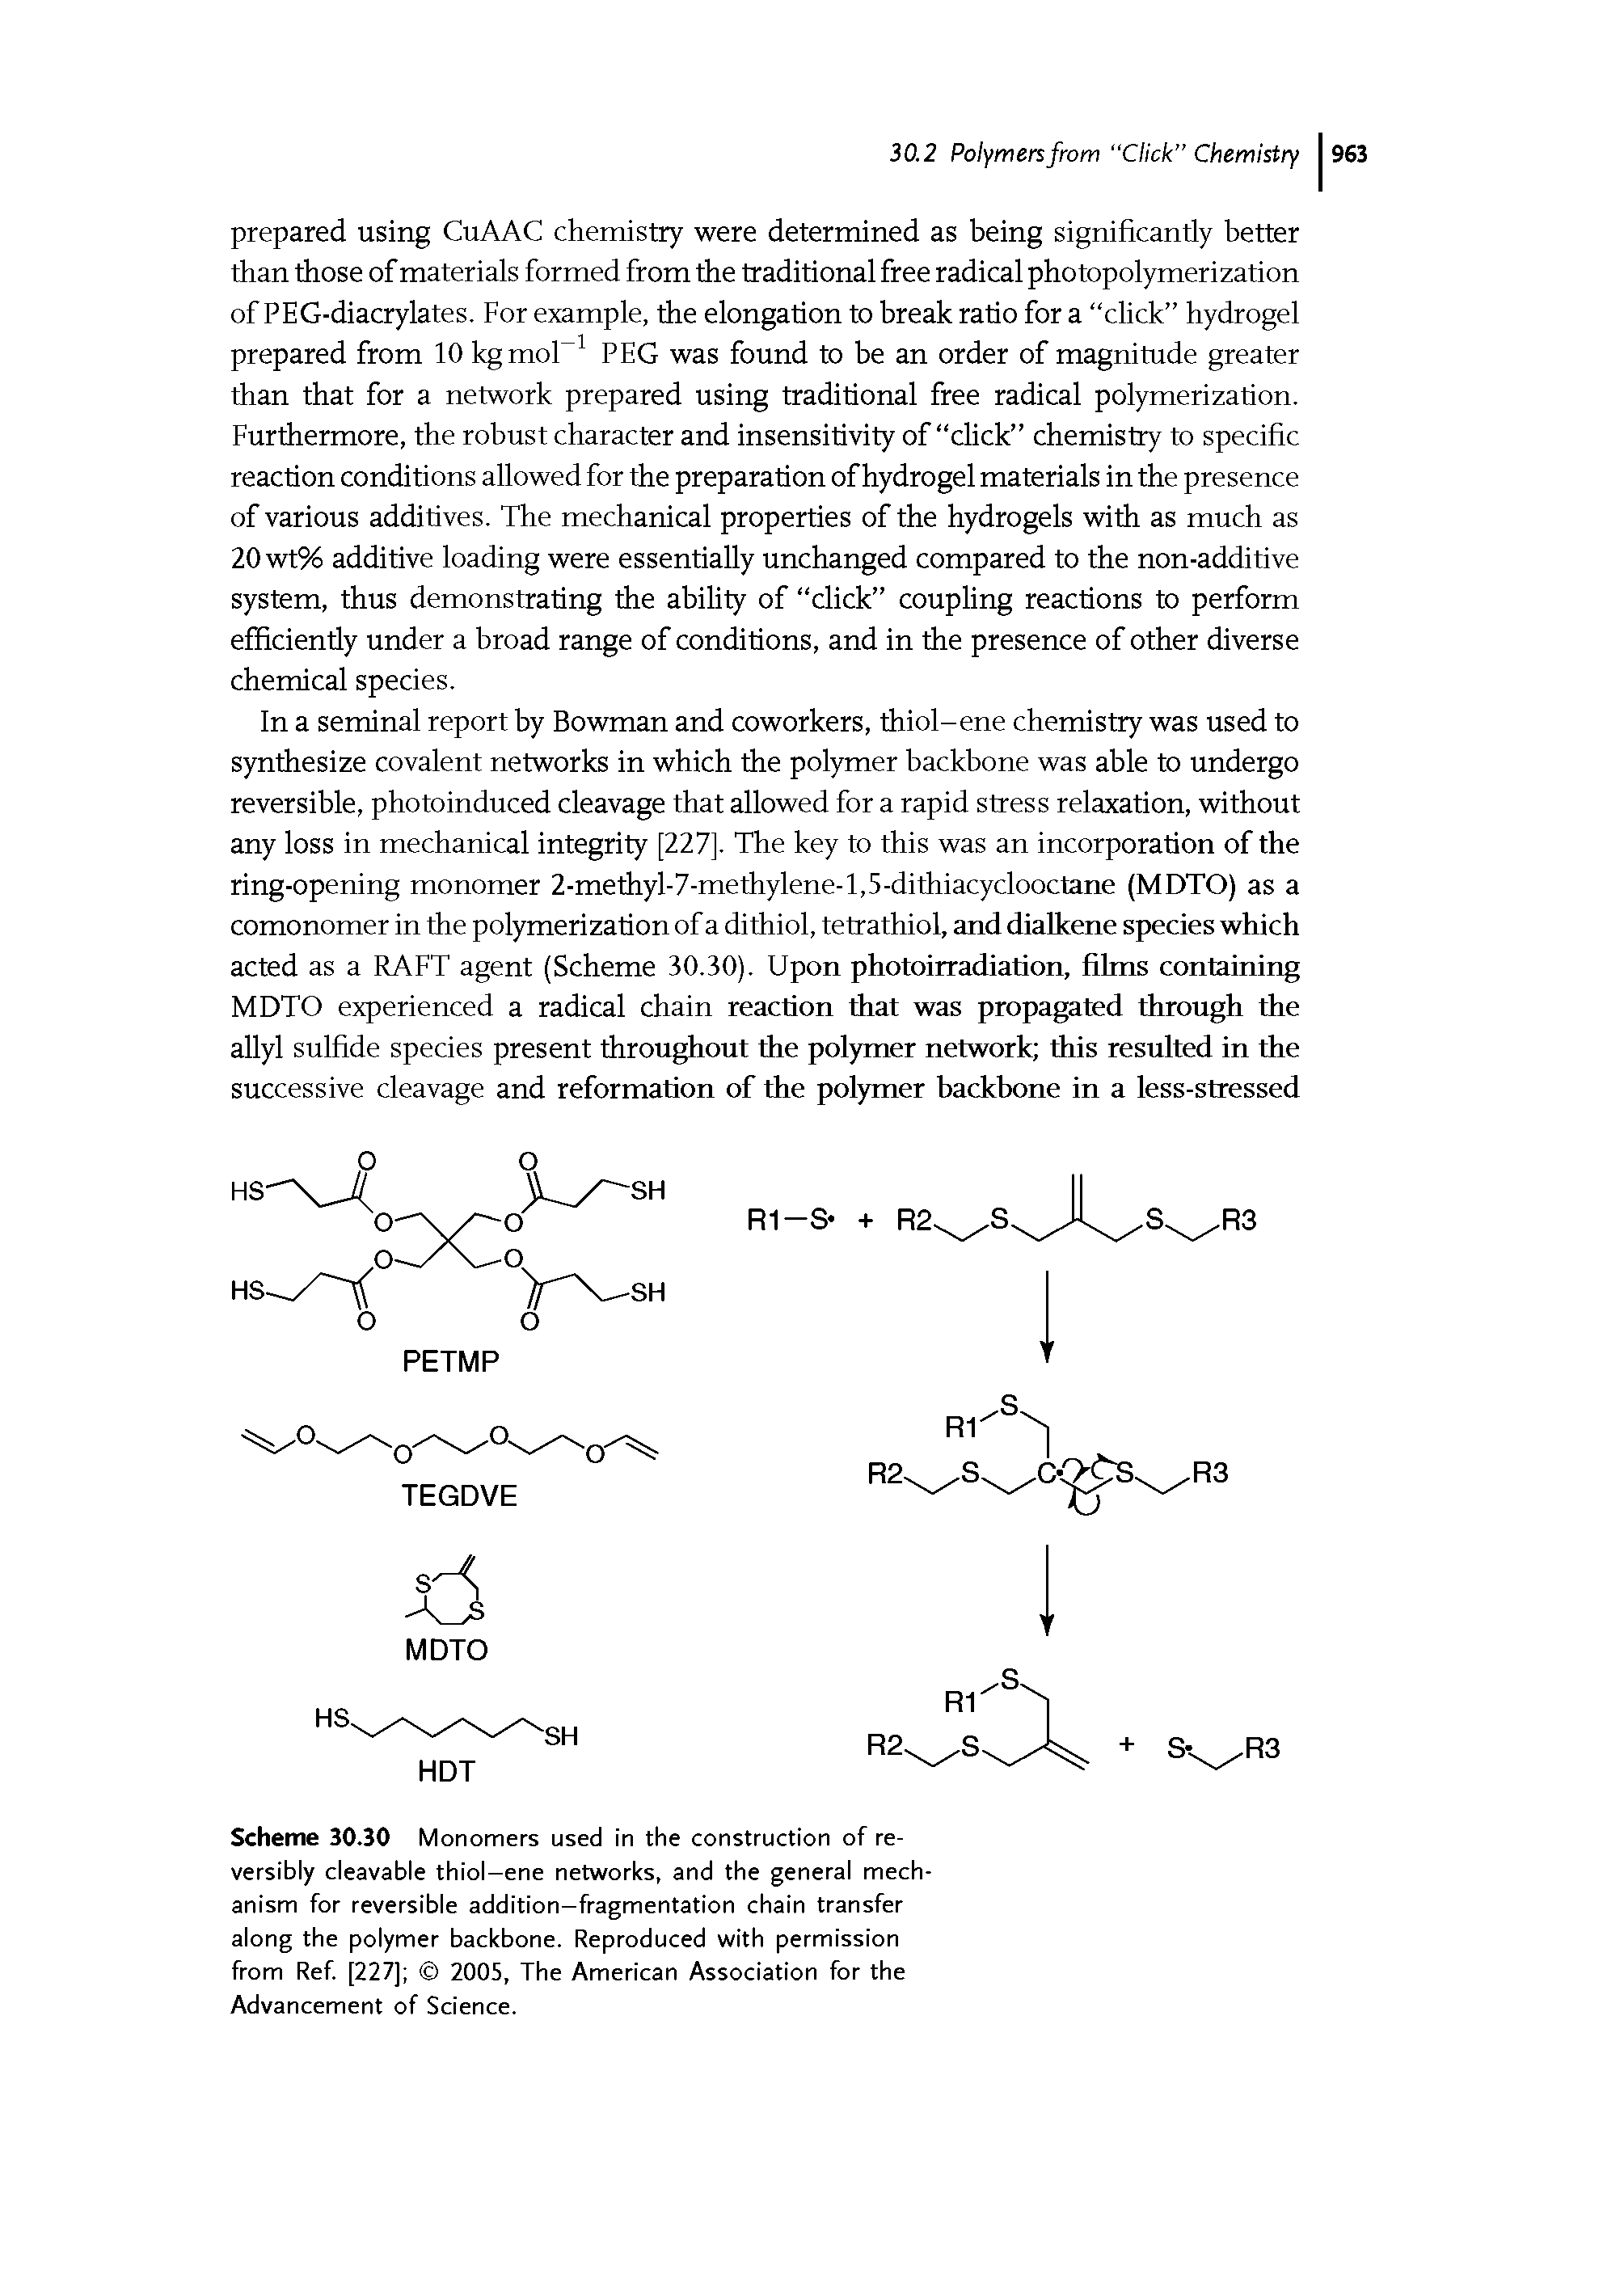 Scheme 30.30 Monomers used in the construction of reversibly cleavable thiol-ene networks, and the general mechanism for reversible addition-fragmentation chain transfer along the polymer backbone. Reproduced with permission from Ref [227] 2005, The American Association for the Advancement of Science.